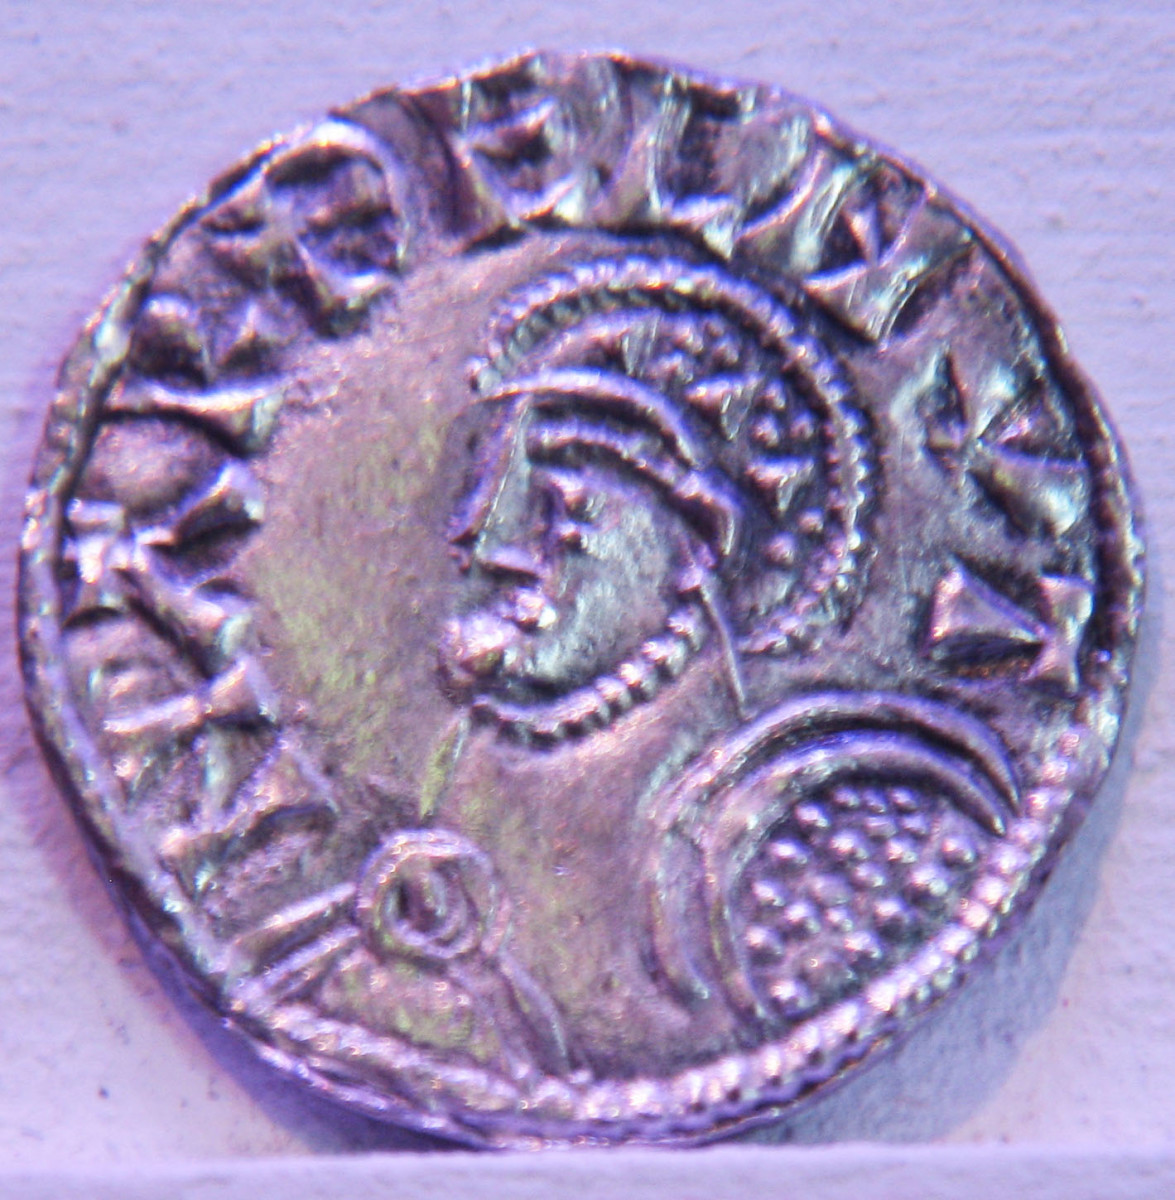 A coin from the reign of Harthaknut Knutsson (Knudsen) depicts him in a classical form of portraiture. Greco-Roman realism did not enter minting of coins until fairly recently